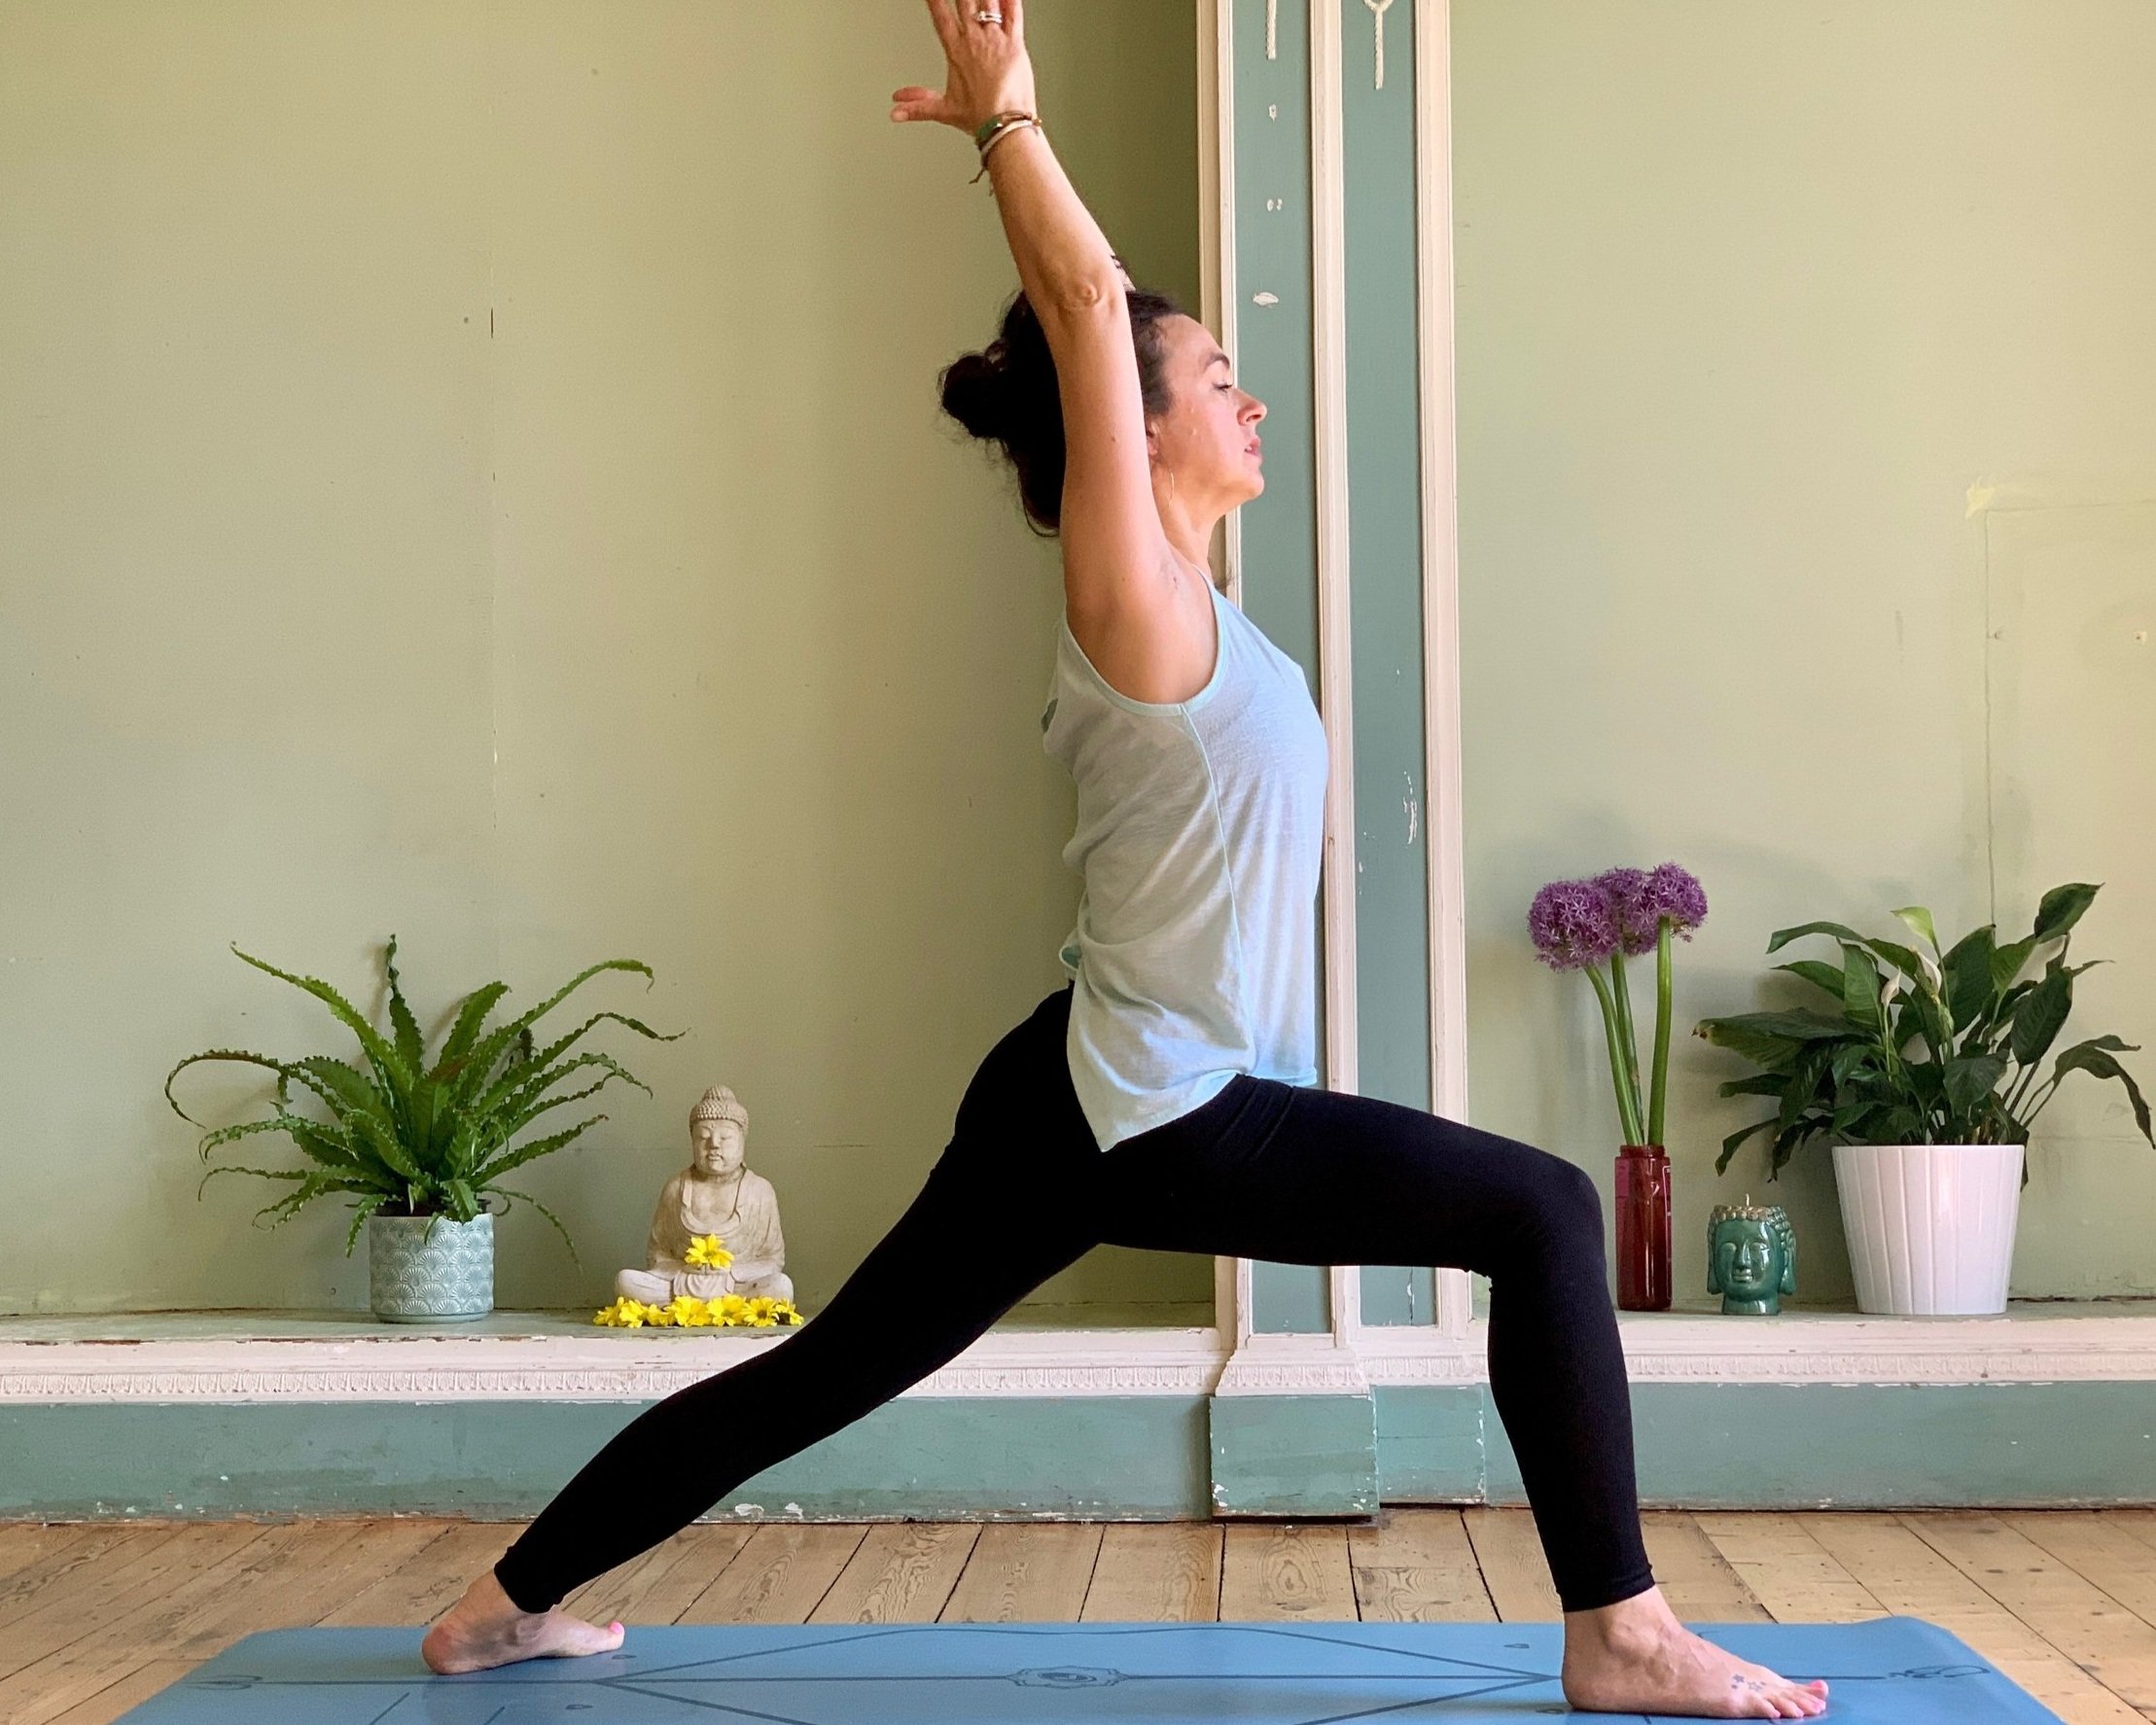 A Yoga Workout That Will Seriously Challenge Your Core! - Nourish, Move,  Love